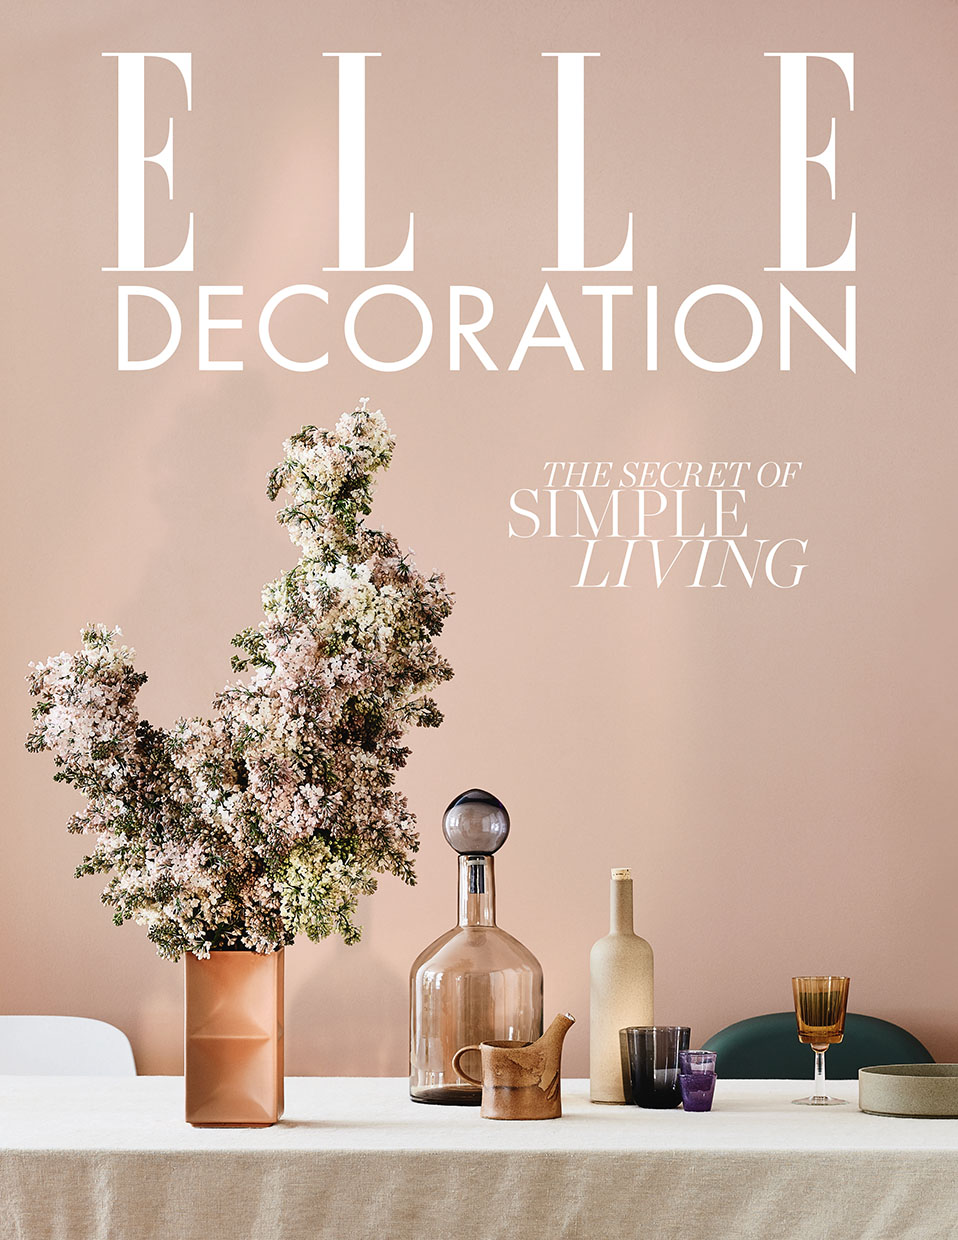 Elle Decoration May 2018 subscriber front cover styled by interior stylist Sania Pell. Photography by Jake Curtis.